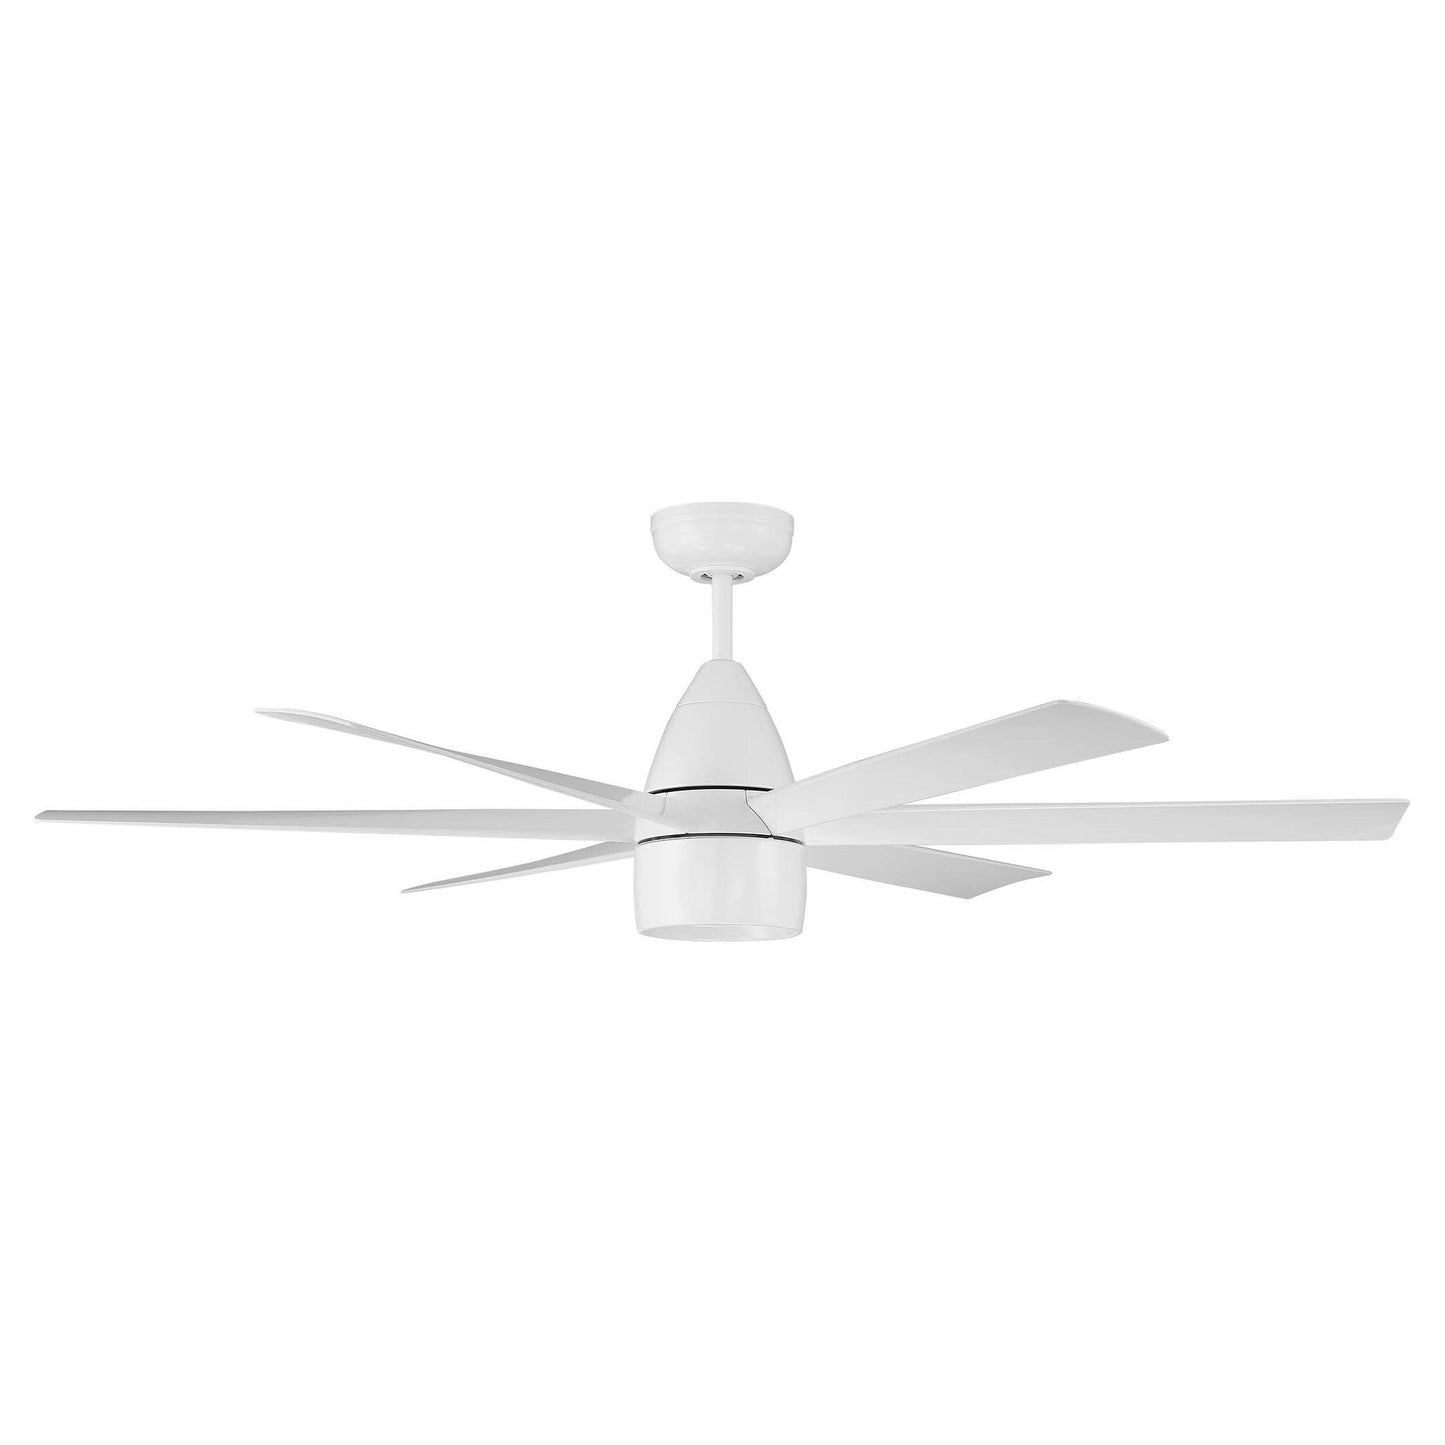 QRK54W6 - Quirk 54" 6 Blade Indoor / Outdoor Ceiling Fan with Light Kit - Wi-Fi Remote Control - Whi